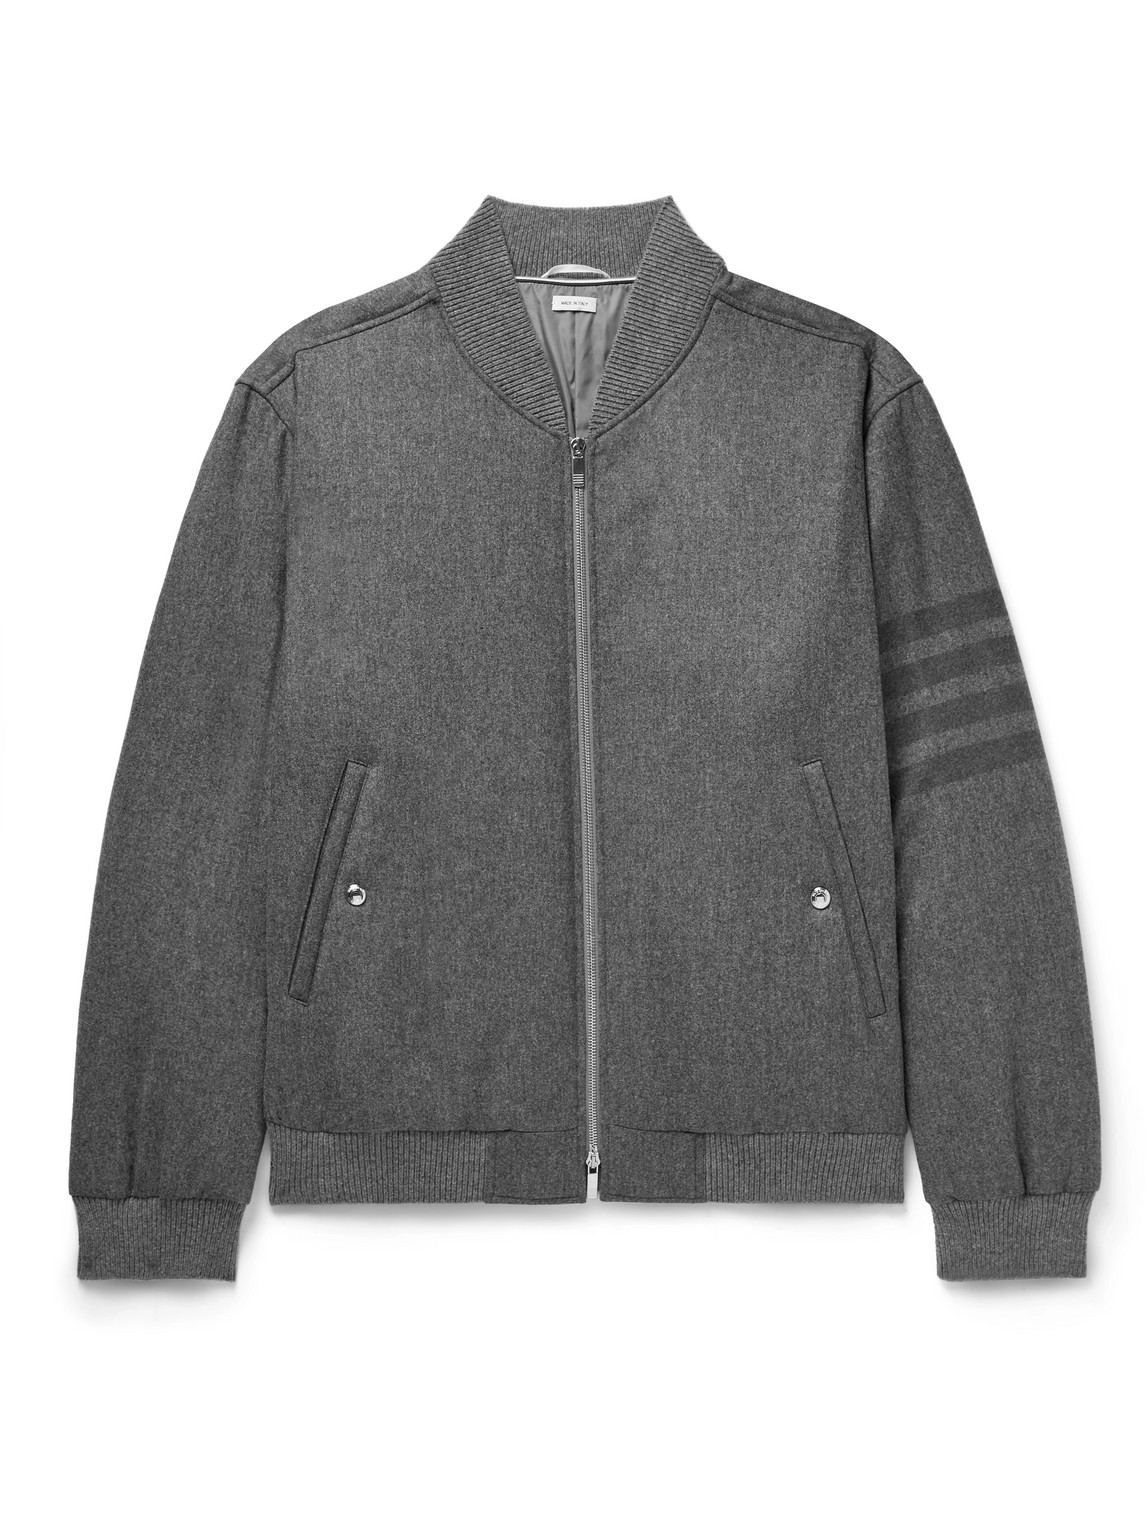 THOM BROWNE WOOL AND CASHMERE-BLEND DOWN BOMBER JACKET